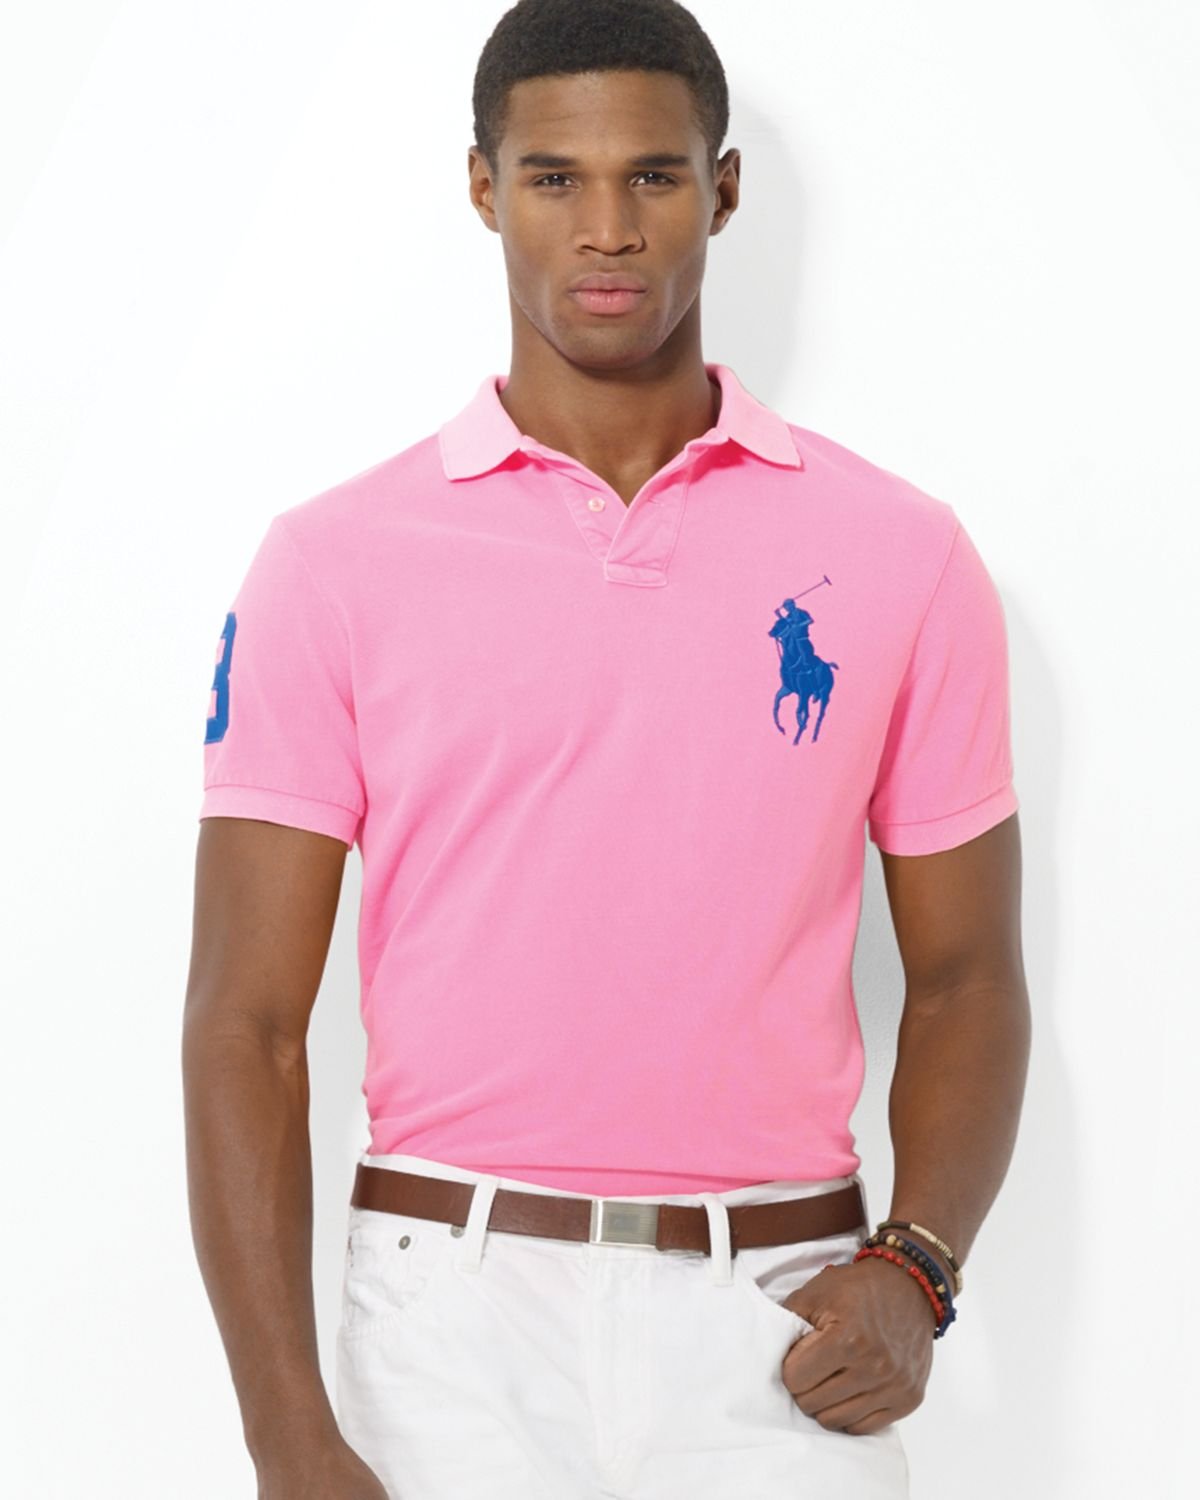 Ralph Lauren Polo Custom Big Pony Mesh Polo Shirt - Slim Fit in Electric  Pink (Pink) for Men - Lyst